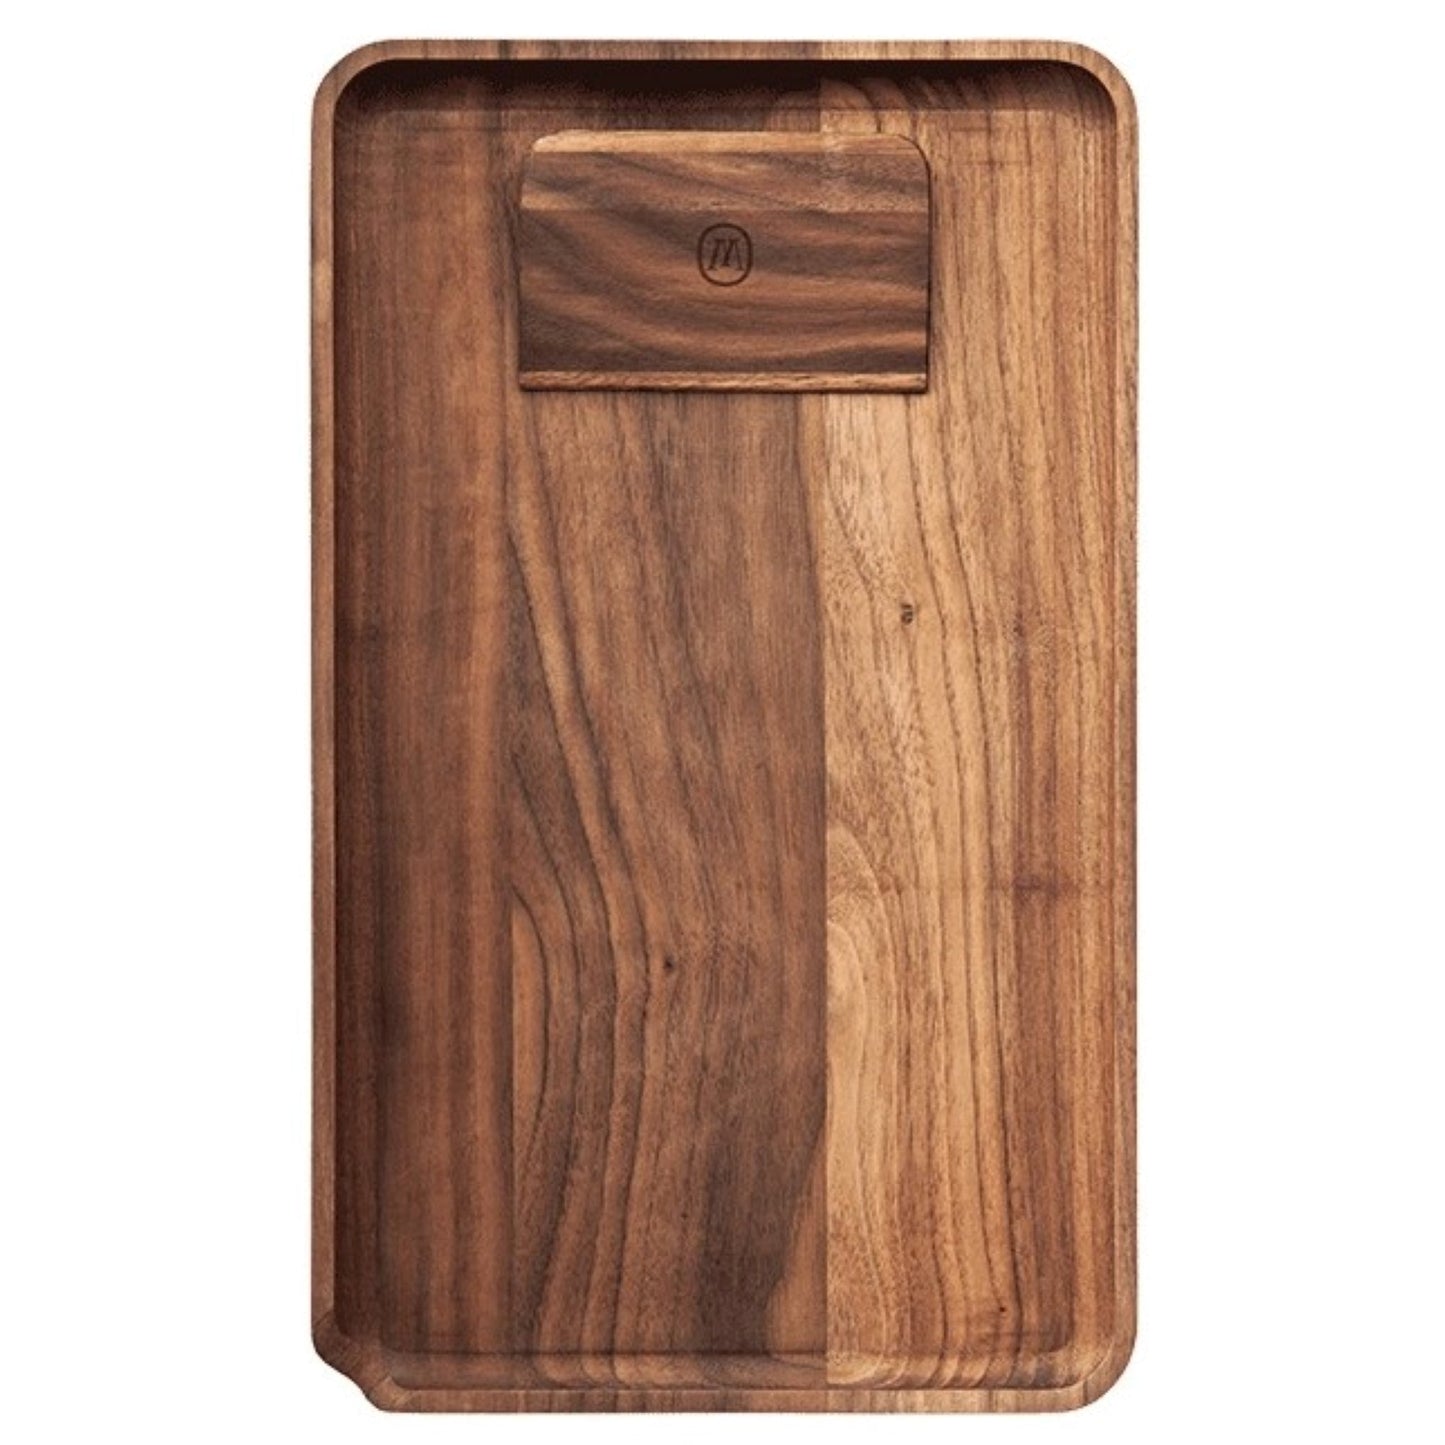 Marley Natural Walnut Rolling Tray by Marley Natural | Mission Dispensary